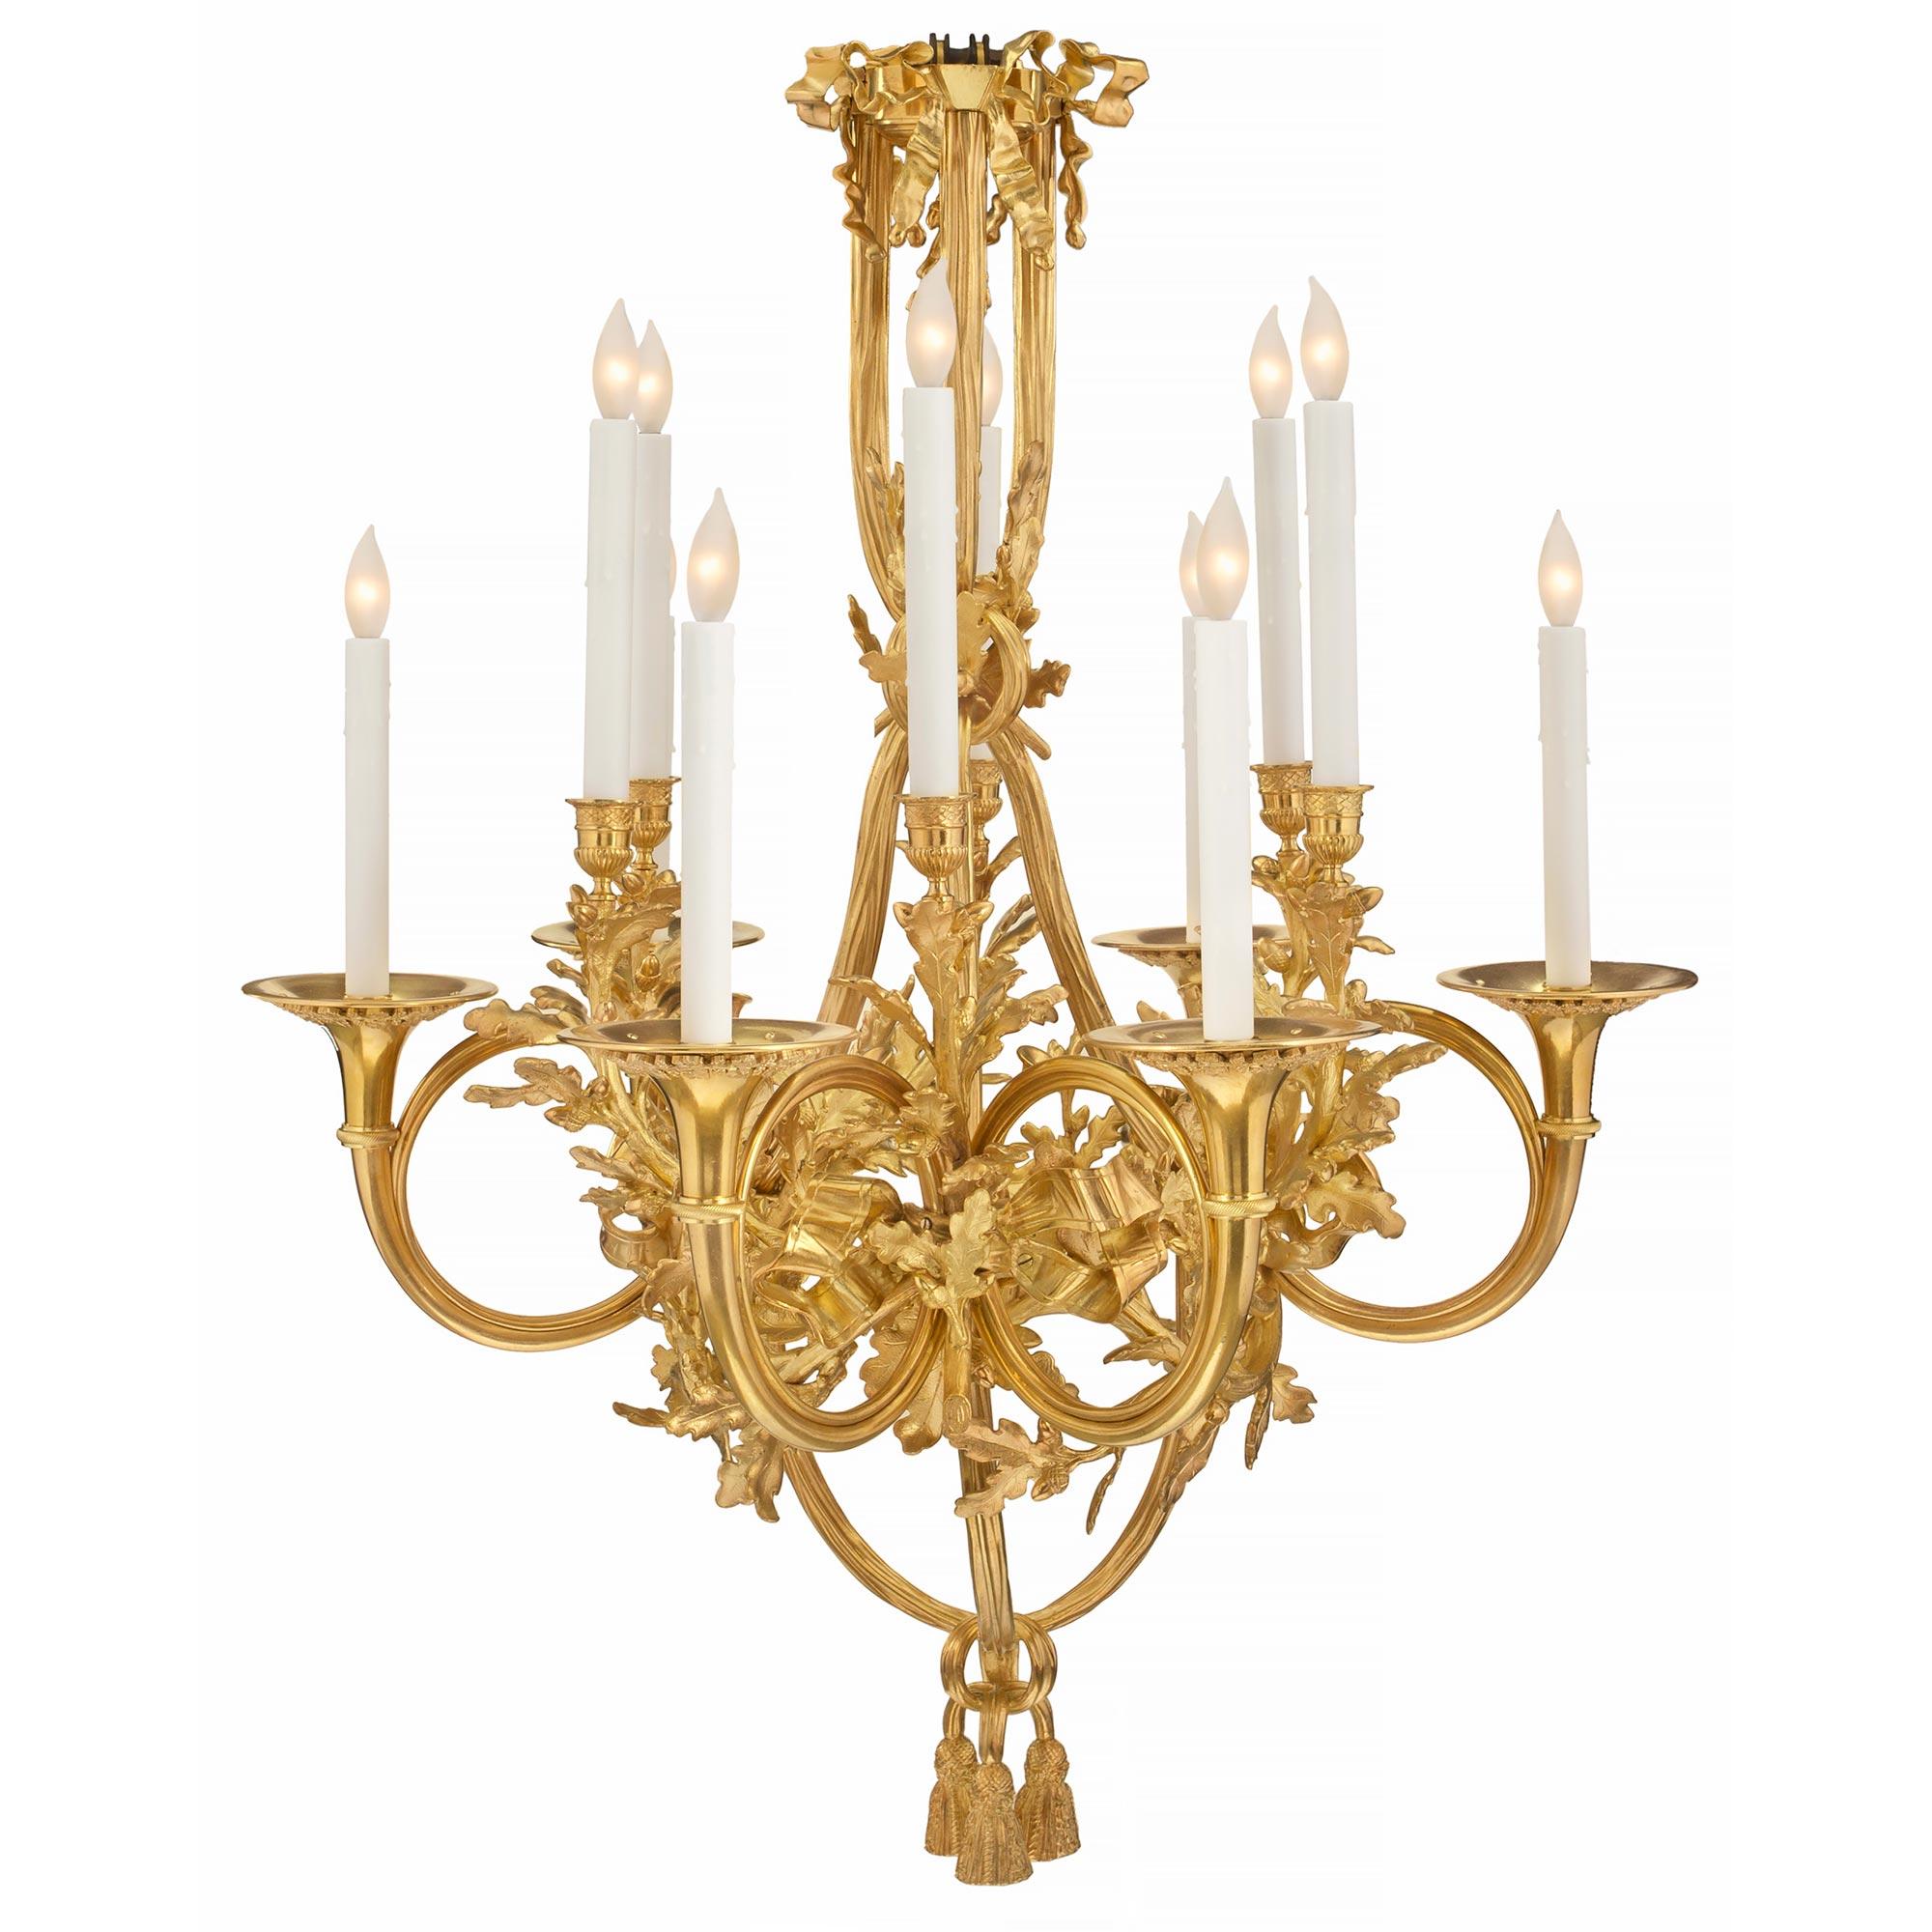 A spectacular French 19th century Louis XVI st. ormolu twelve light chandelier. The top of the chandelier has three richly detailed bows with ribbons flowing down and tied at the mid-section by acorn leaves. The ribbons continue downwards to a